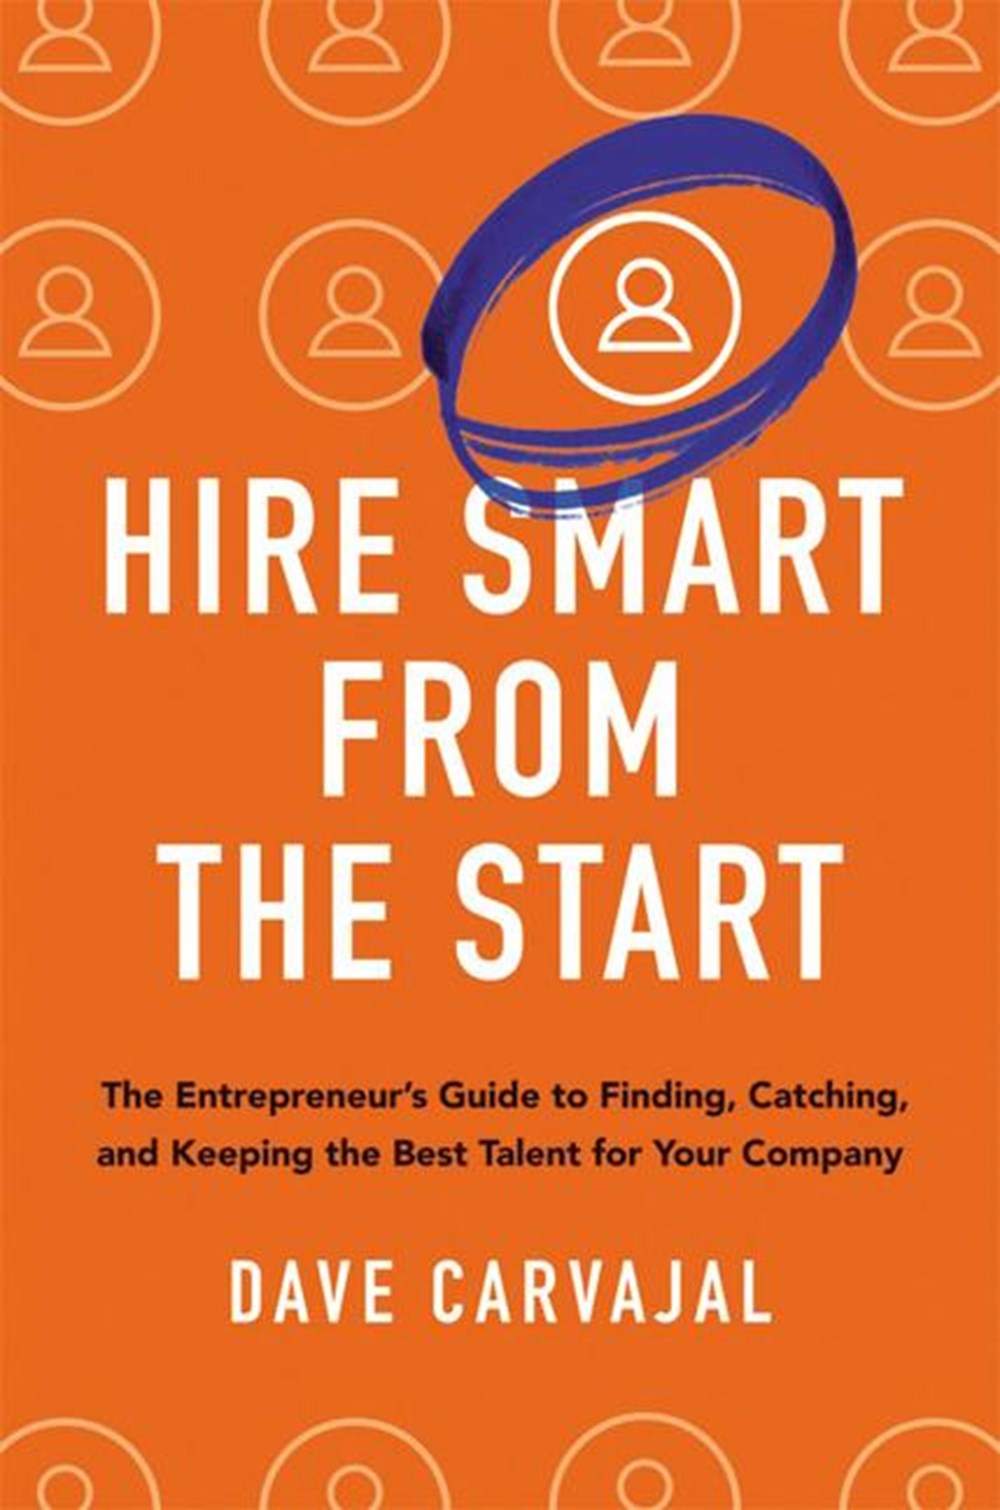 Hire Smart from the Start: The Entrepreneur's Guide to Finding, Catching, and Keeping the Best Talen